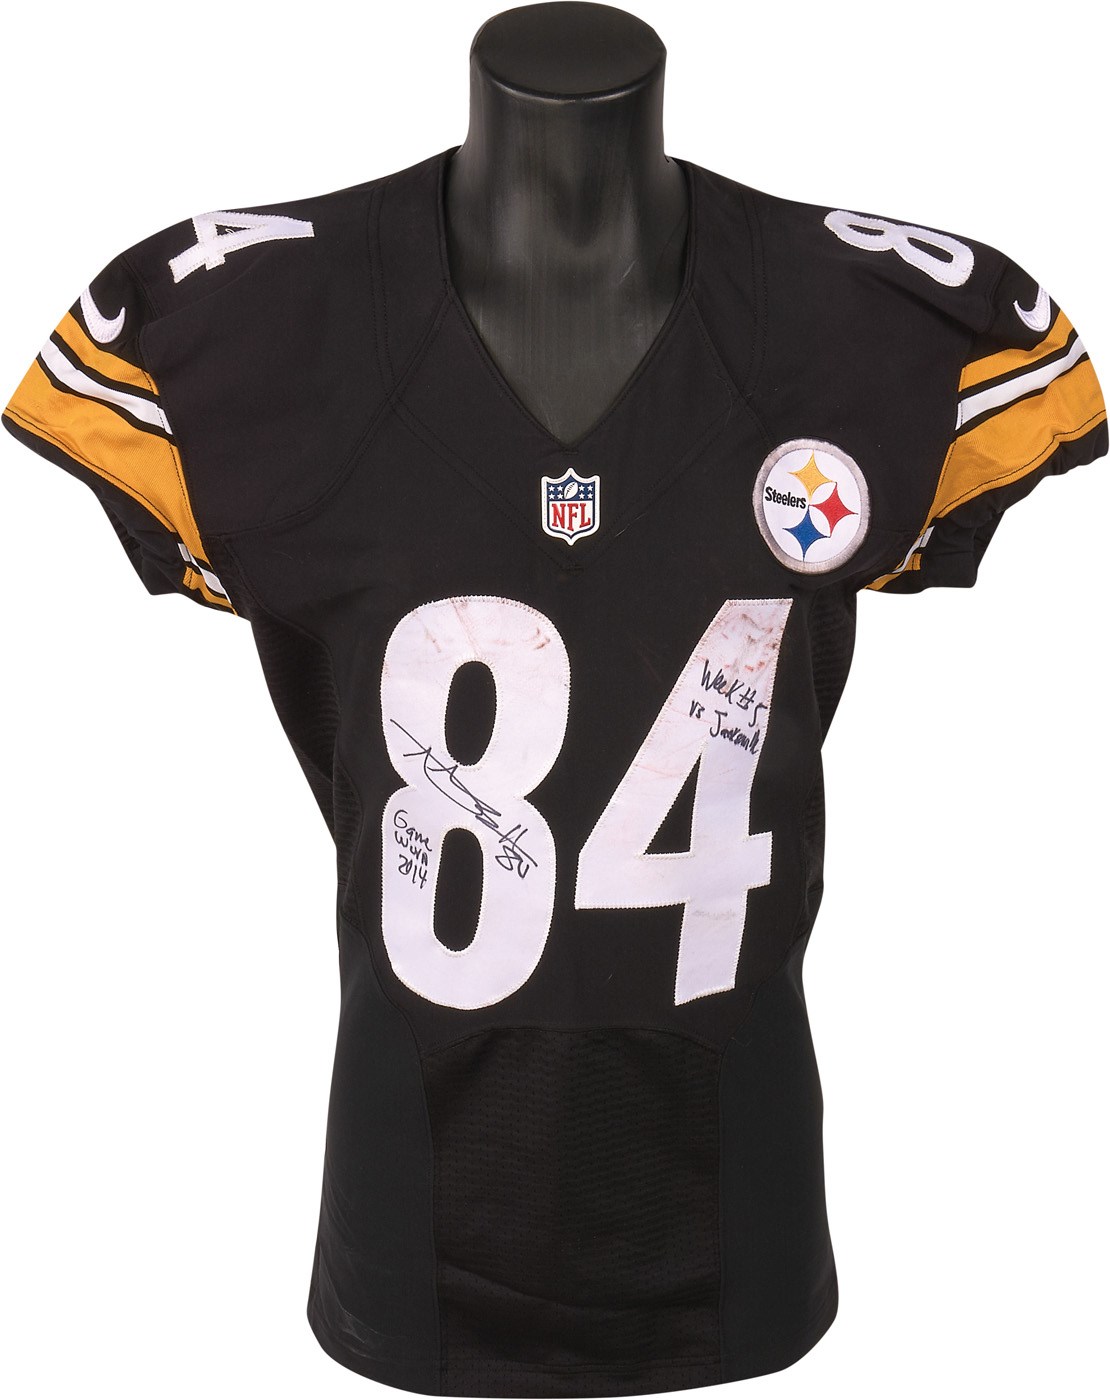 - 2014 Antonio Brown Pittsburgh Steelers Game Worn Jersey (Direct from Brown & Photo-Matched)